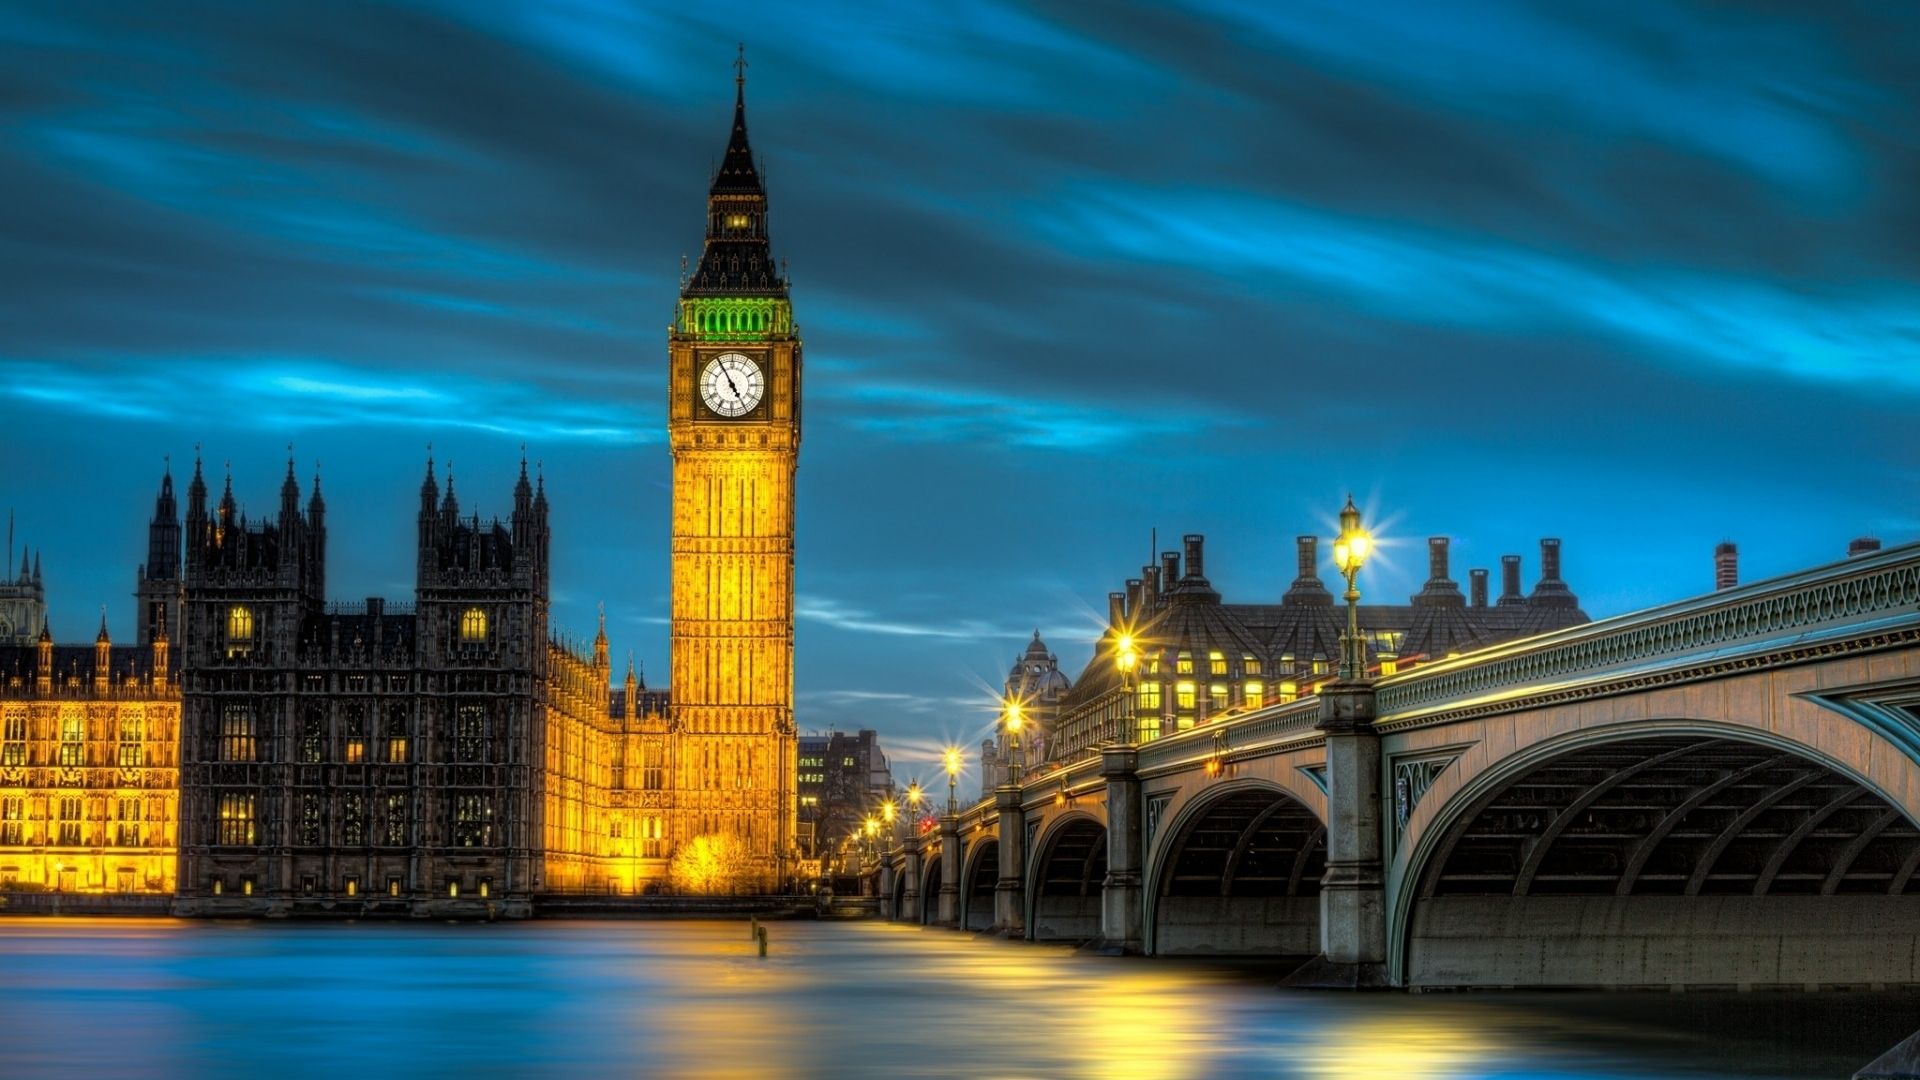 Amazing Palace of Westminster MacBook Air Wallpaper Download